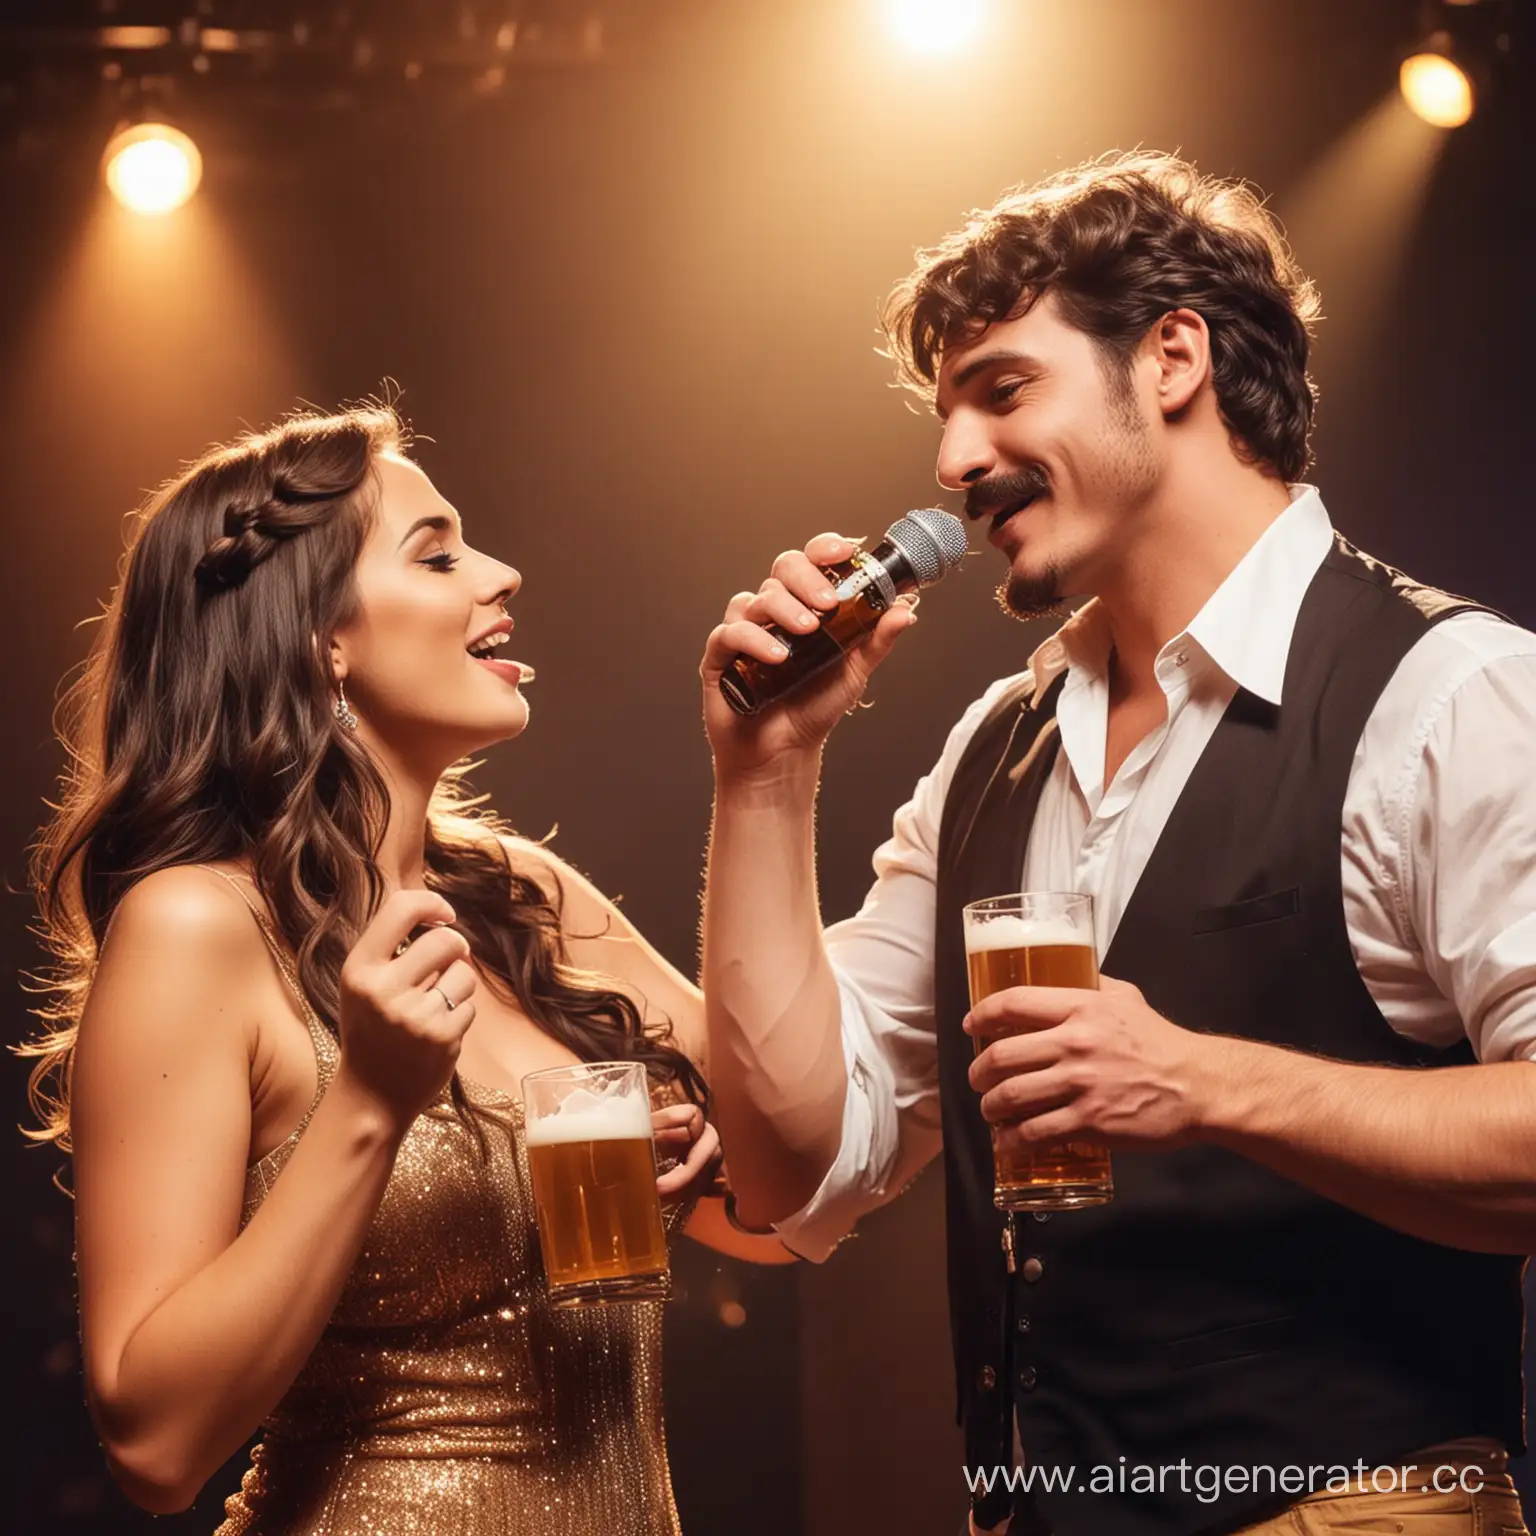 Pop-Singer-with-Mustache-and-Beer-Performing-for-Girlfriend